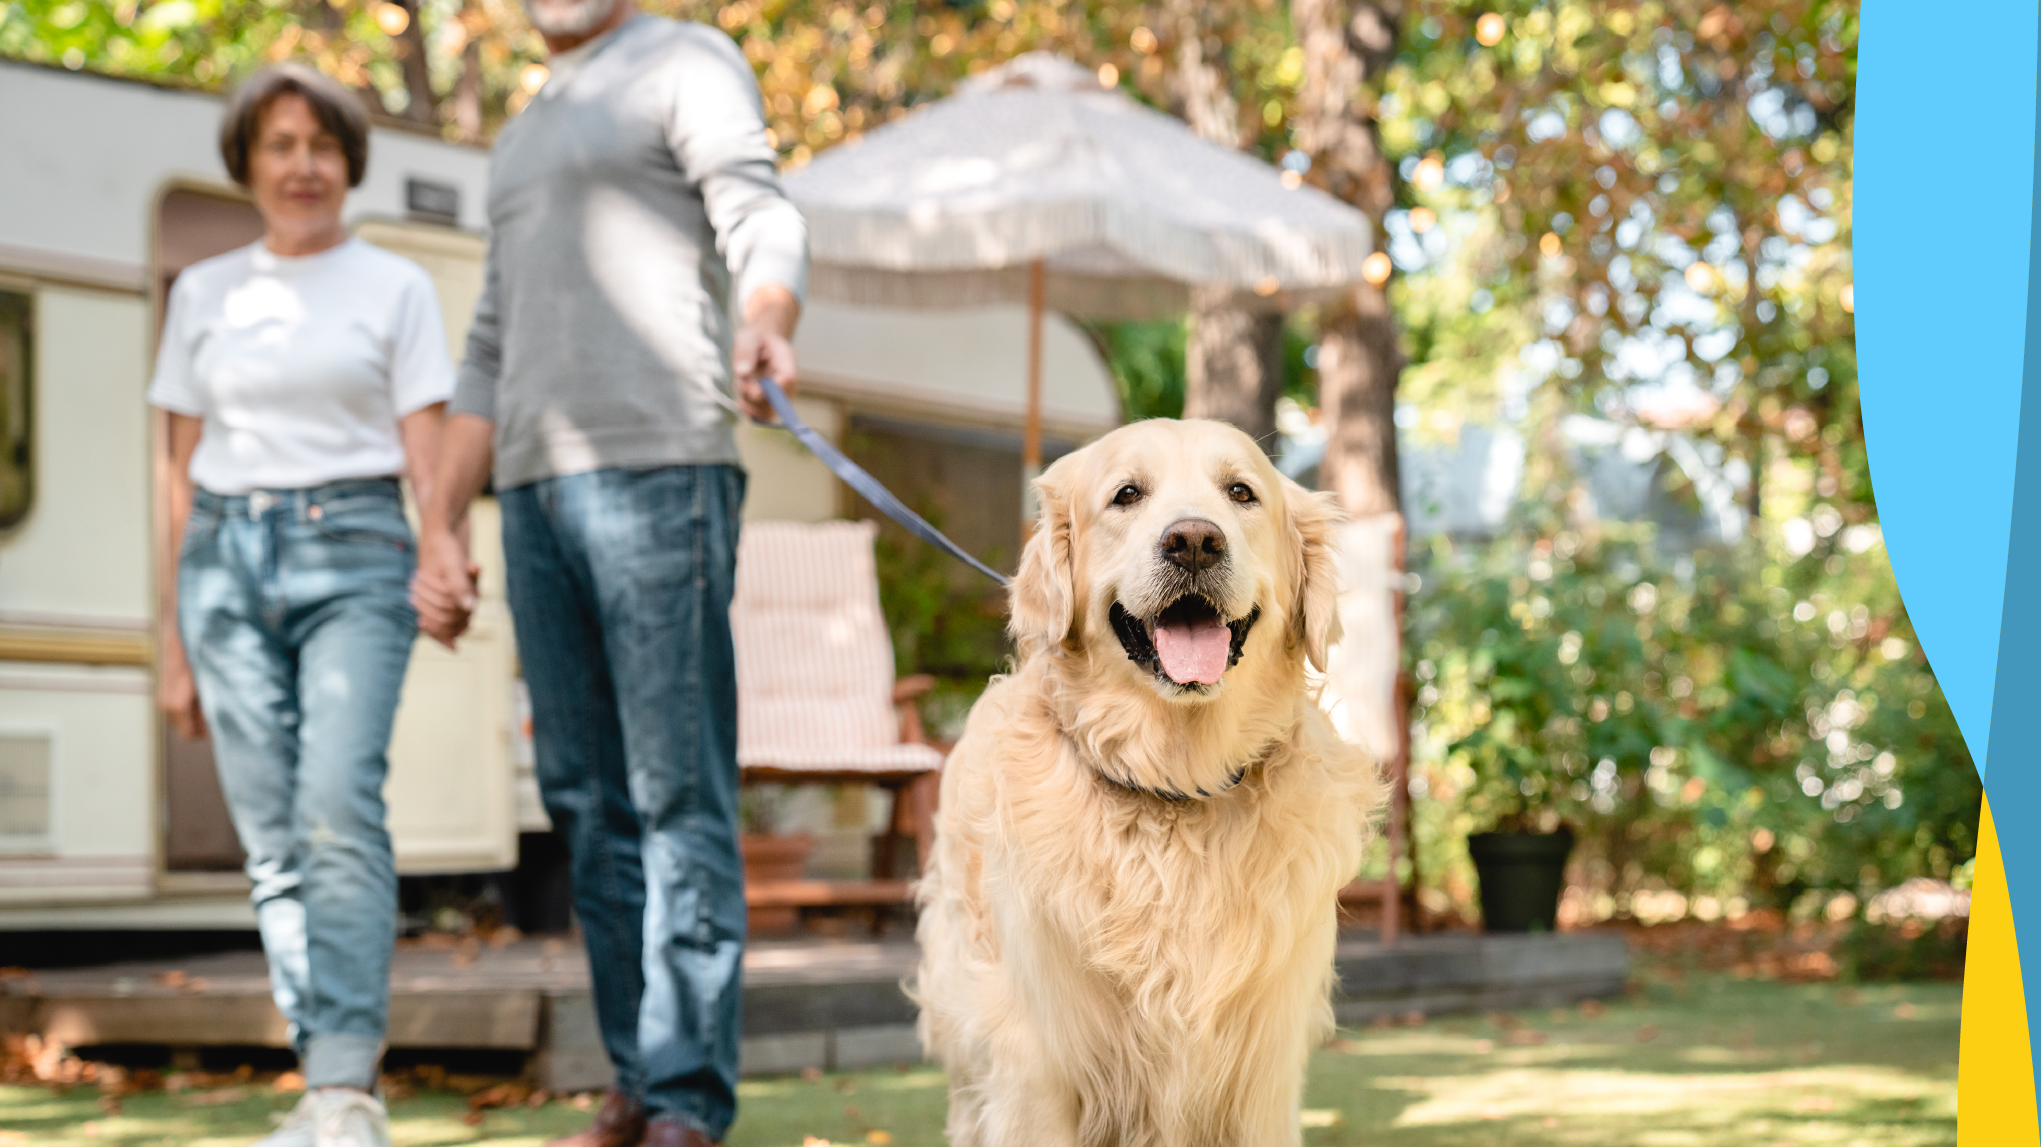 Woman and man blurred in the background with a golden retriever in the foreground outside.